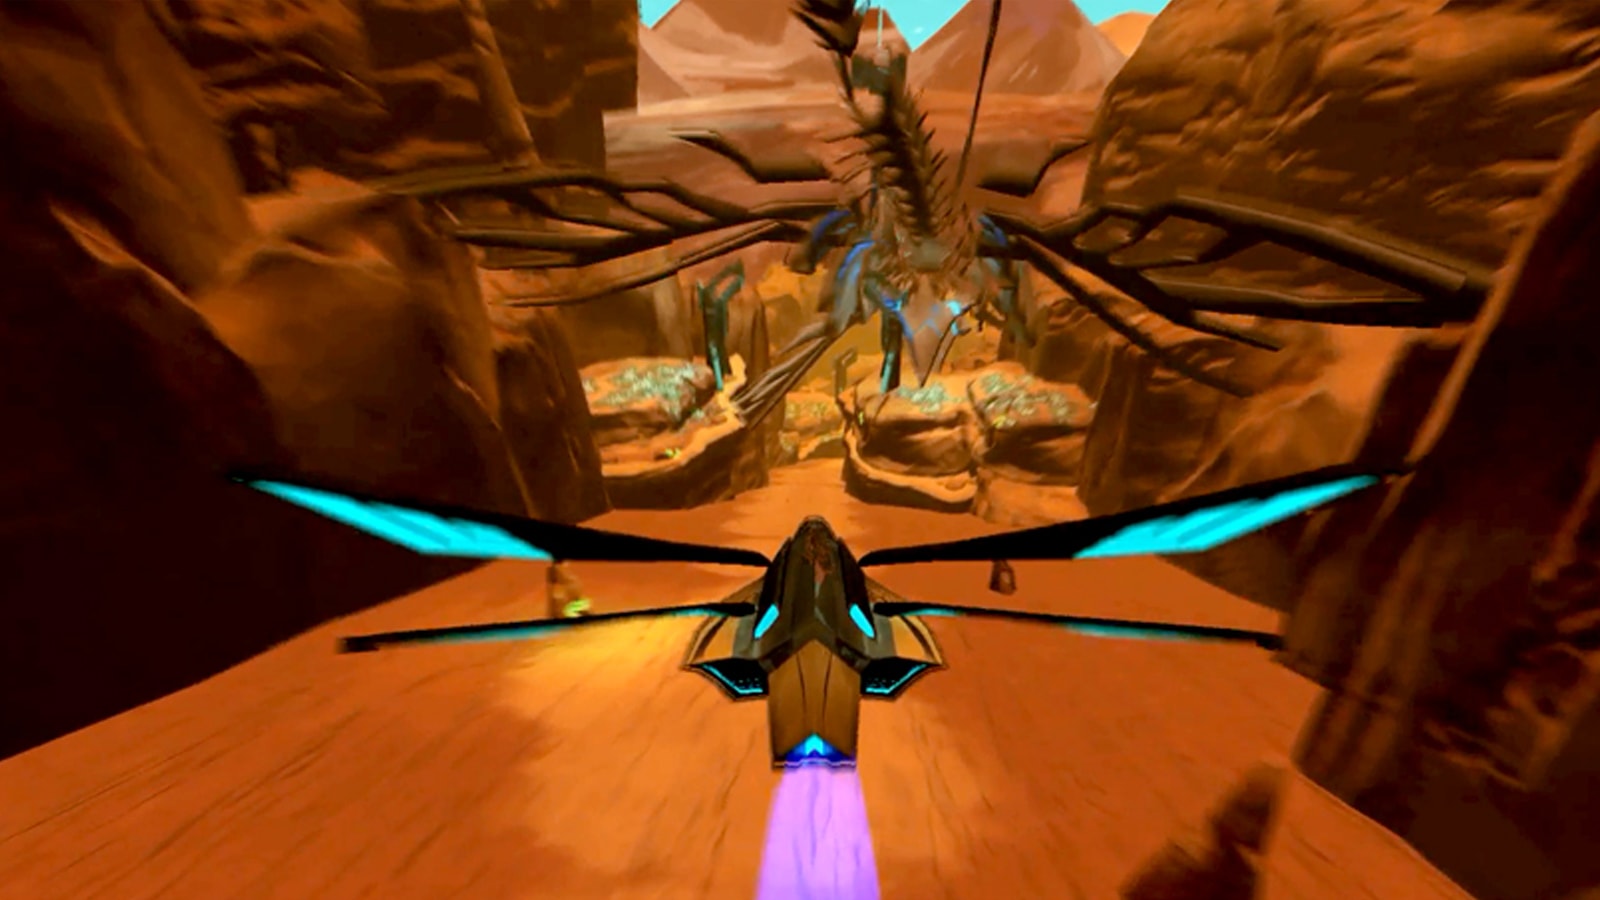 A spacecraft with bug-like wings soars over a desert cavern, a flying alien overhead. 